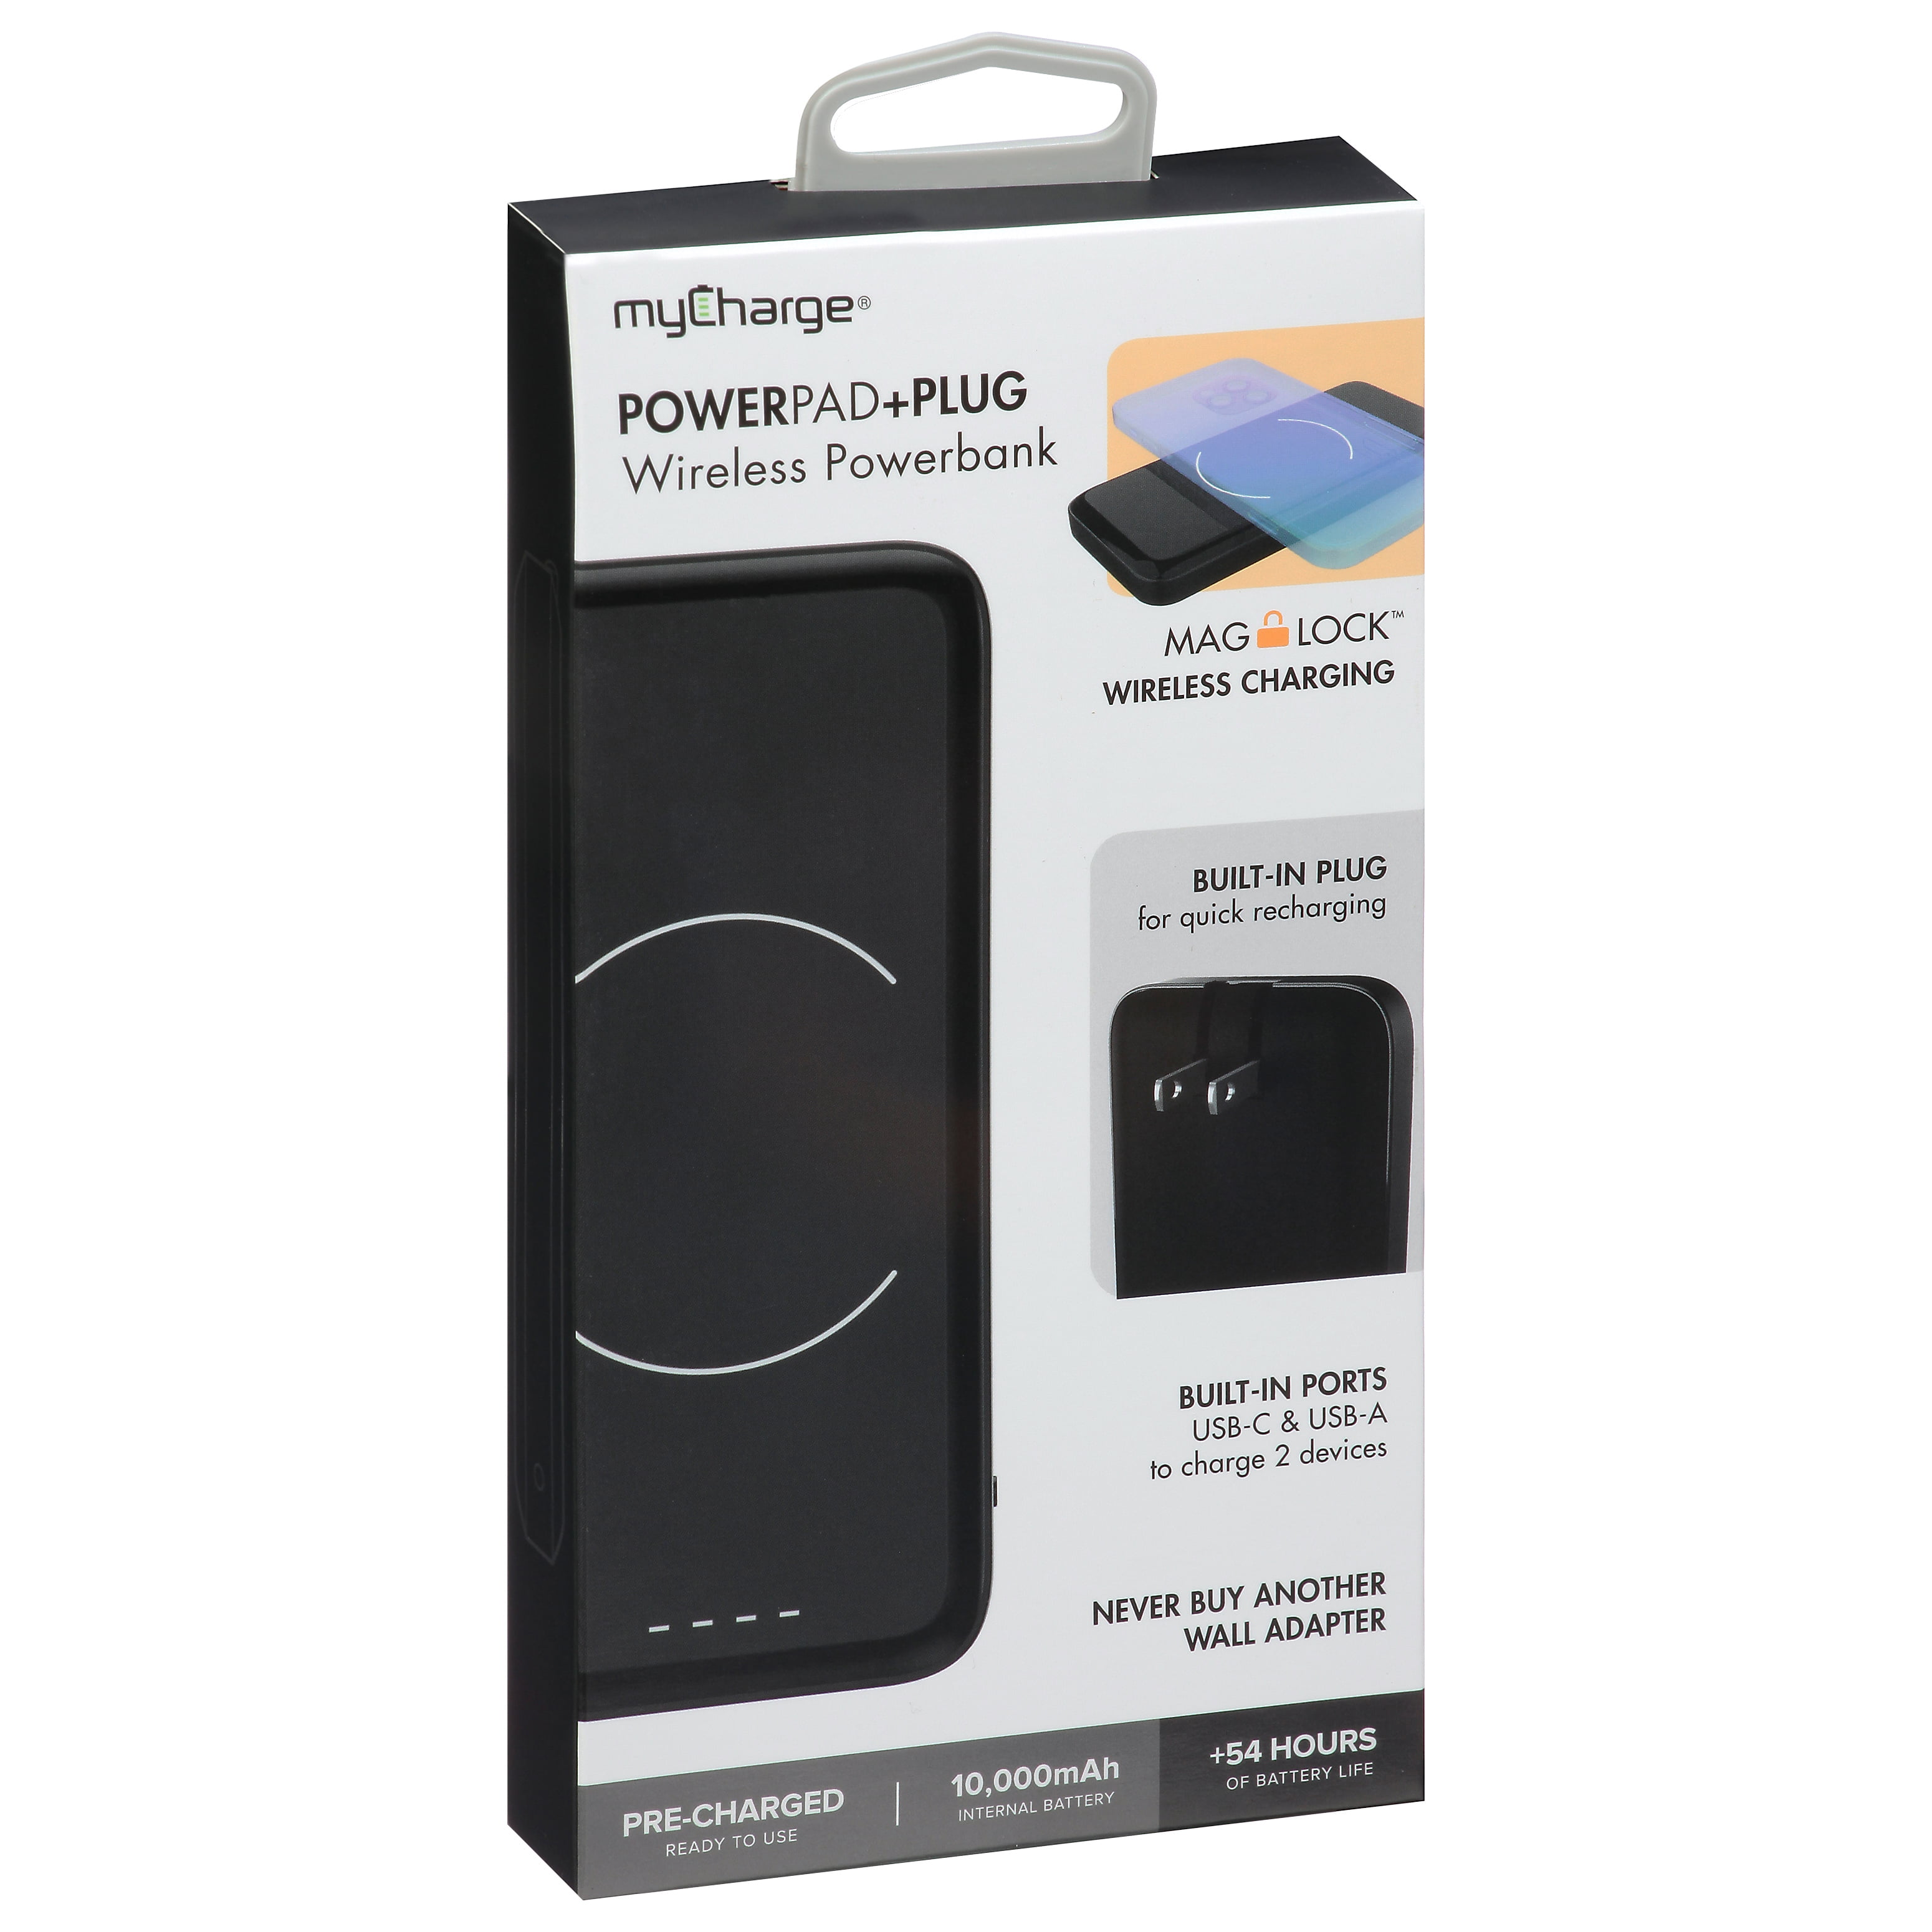 søvn Baron buffet mycharge powerpad foldable plug magnetic power bank wireless portable  charger compatible with magsafe for iphone 12 - maglock battery pack fast  charging for apple, android (10000 mah internal battery) - Walmart.com